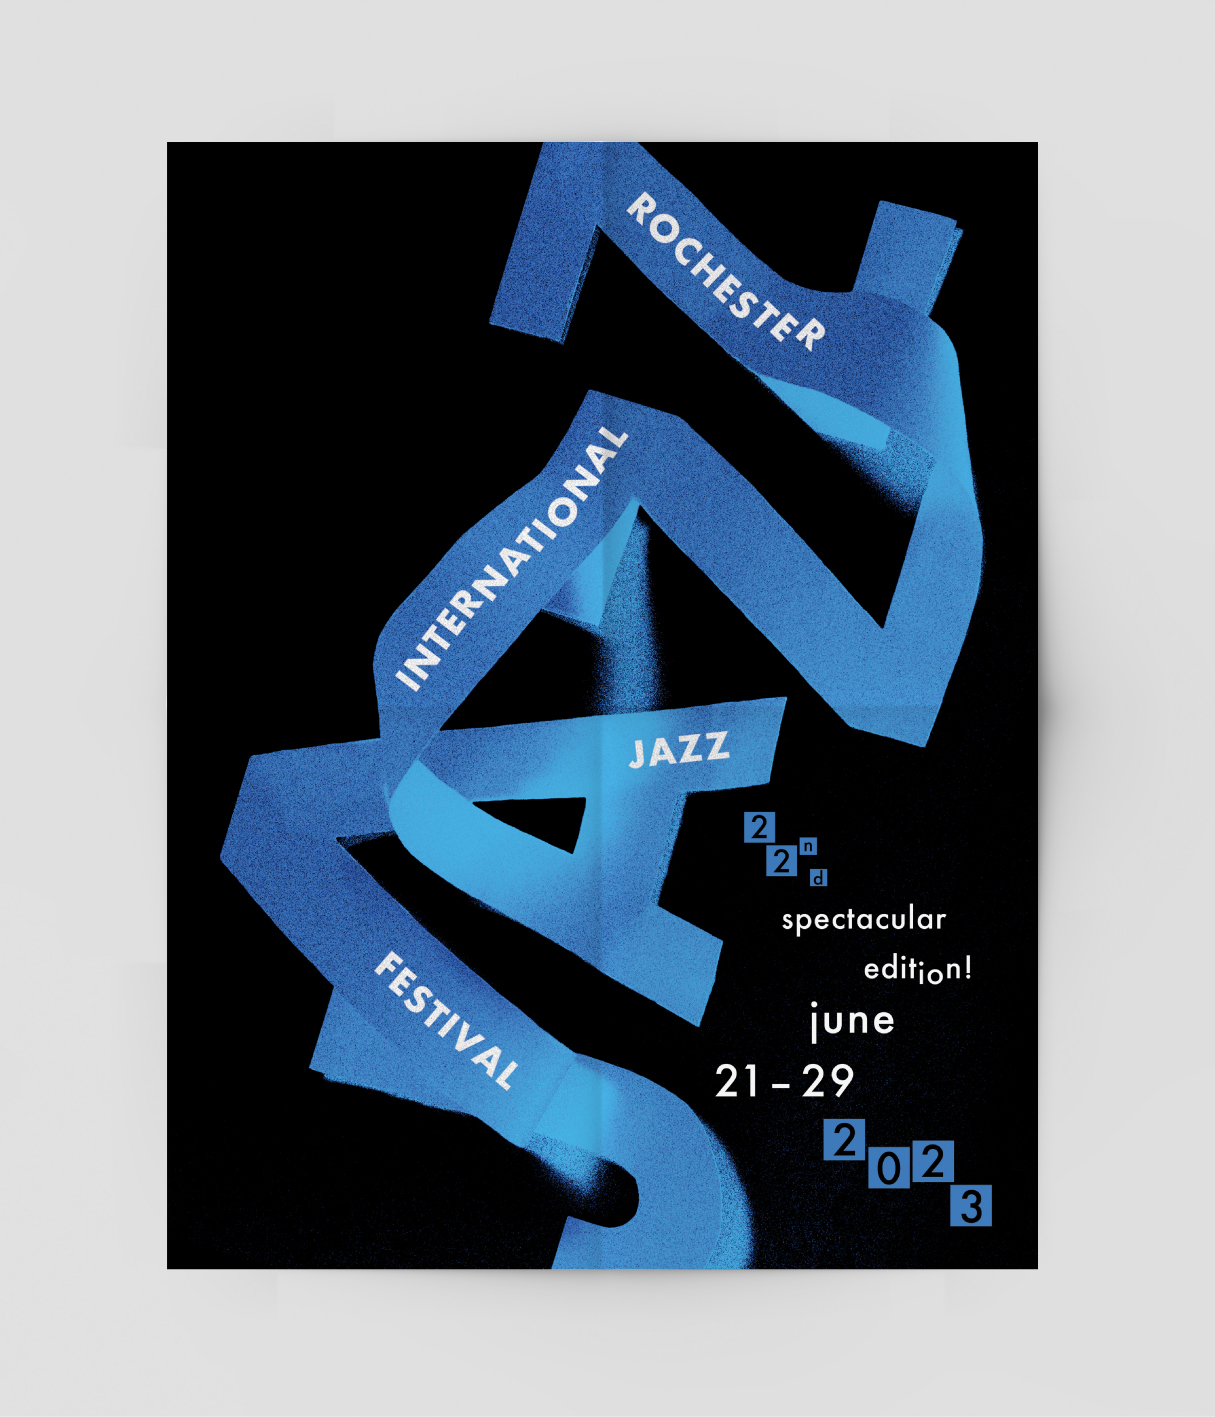 A poster promoting the Rochester Jazz Festival.